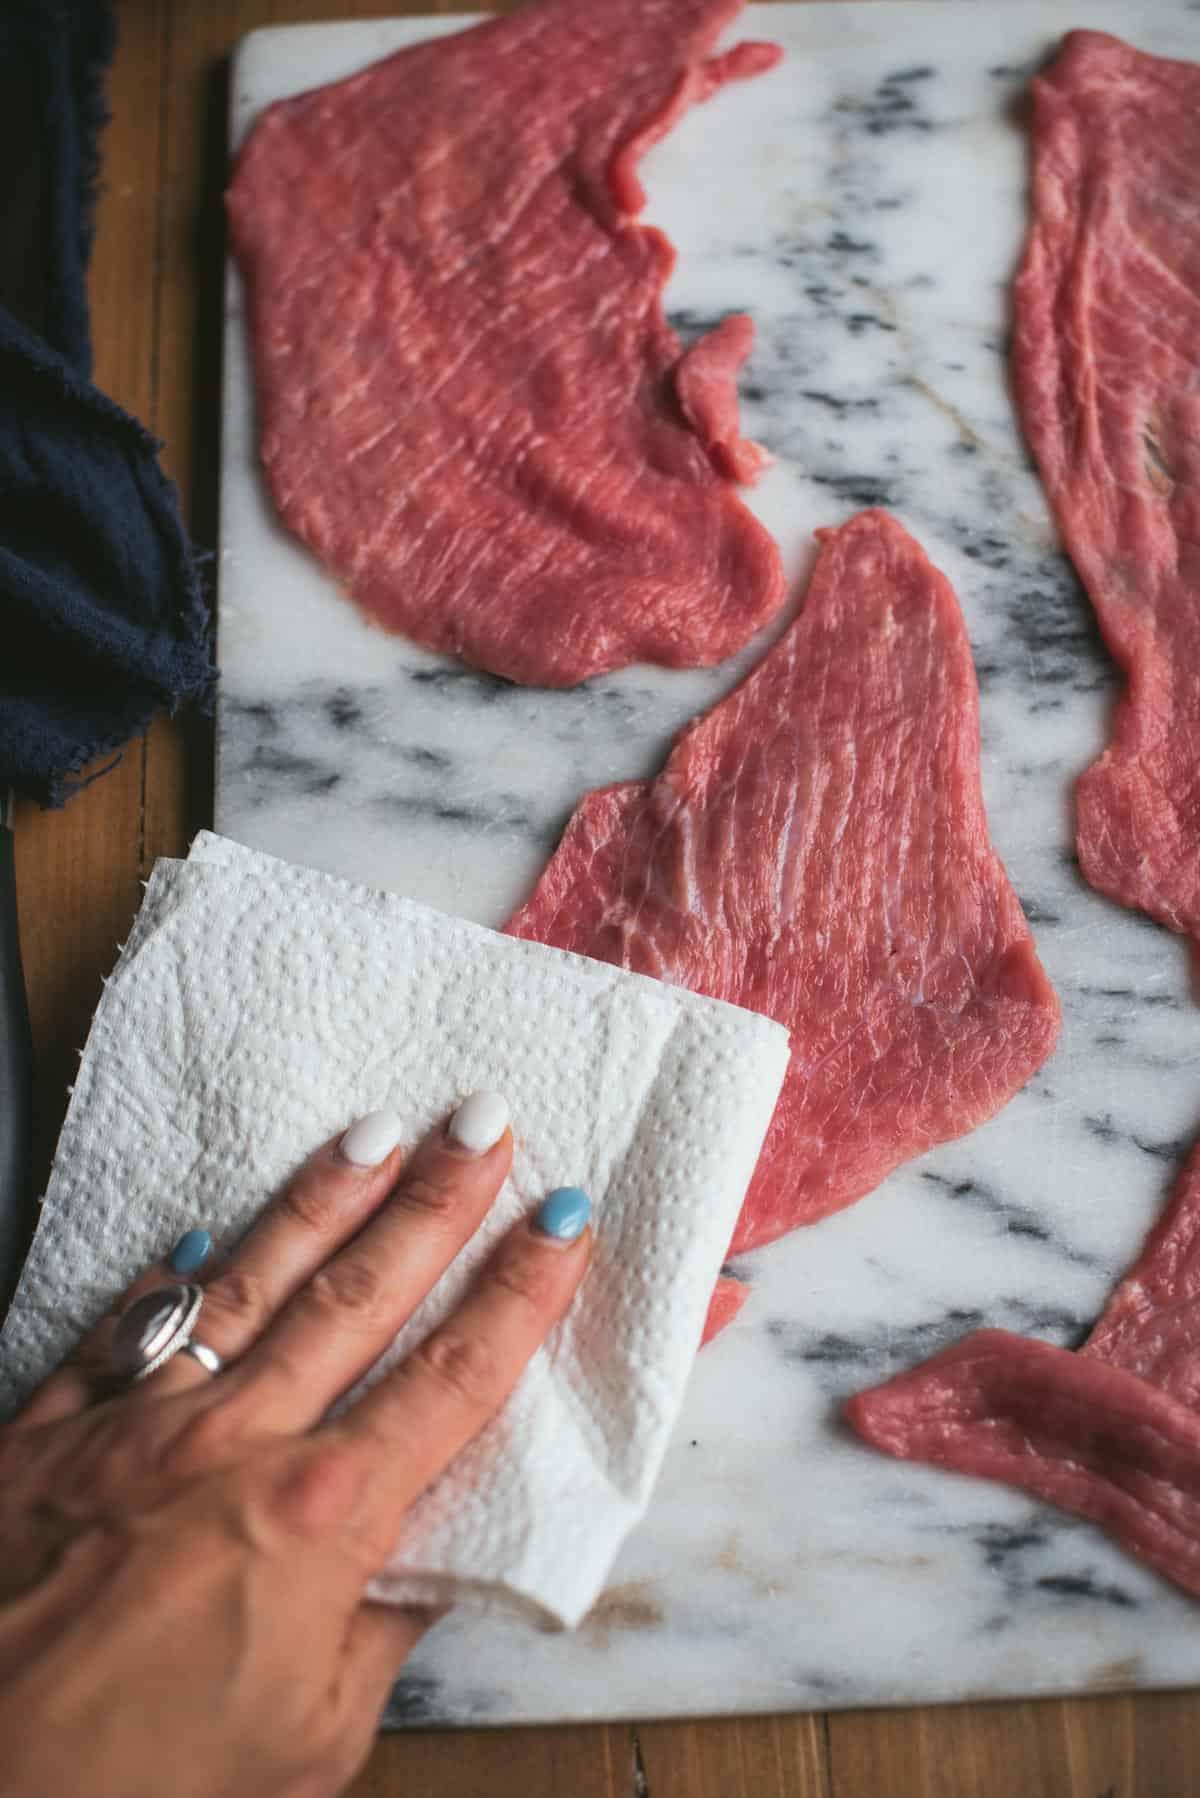 4 pieces of veal cutlet are laying on a white marbled chopping board and a hand is drying up any excess moisture with a piece of kitchen towel.